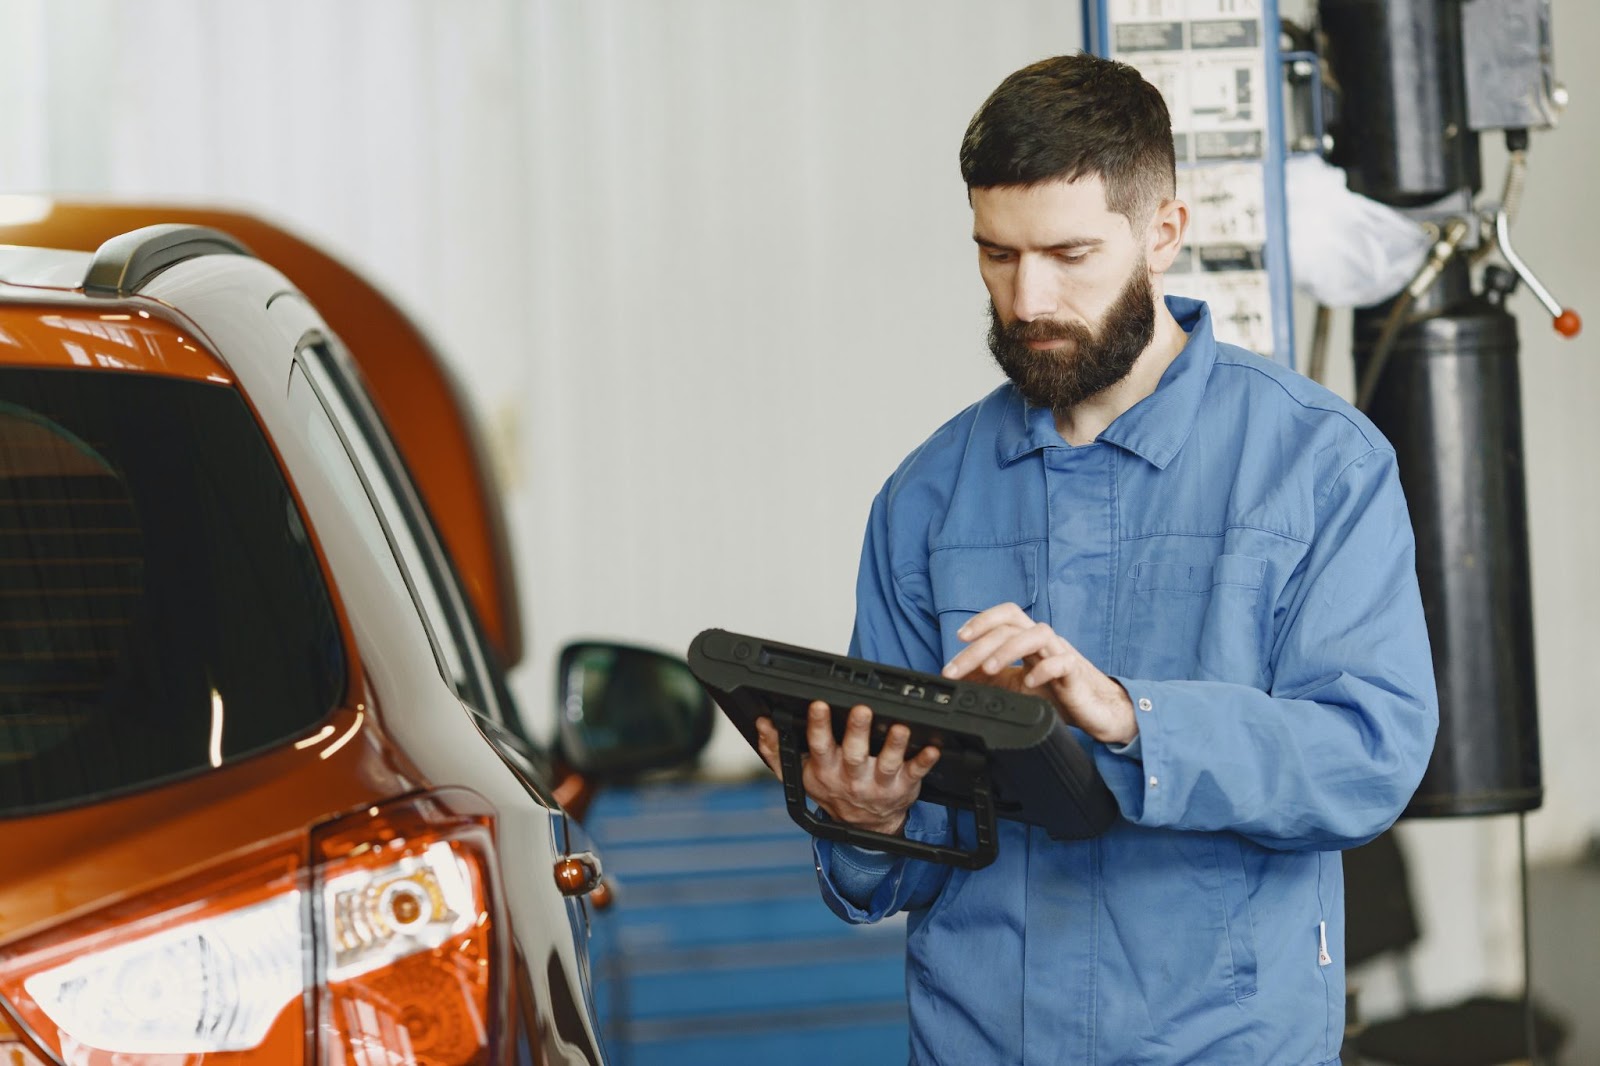 Man in Blue overall scans car with IPad